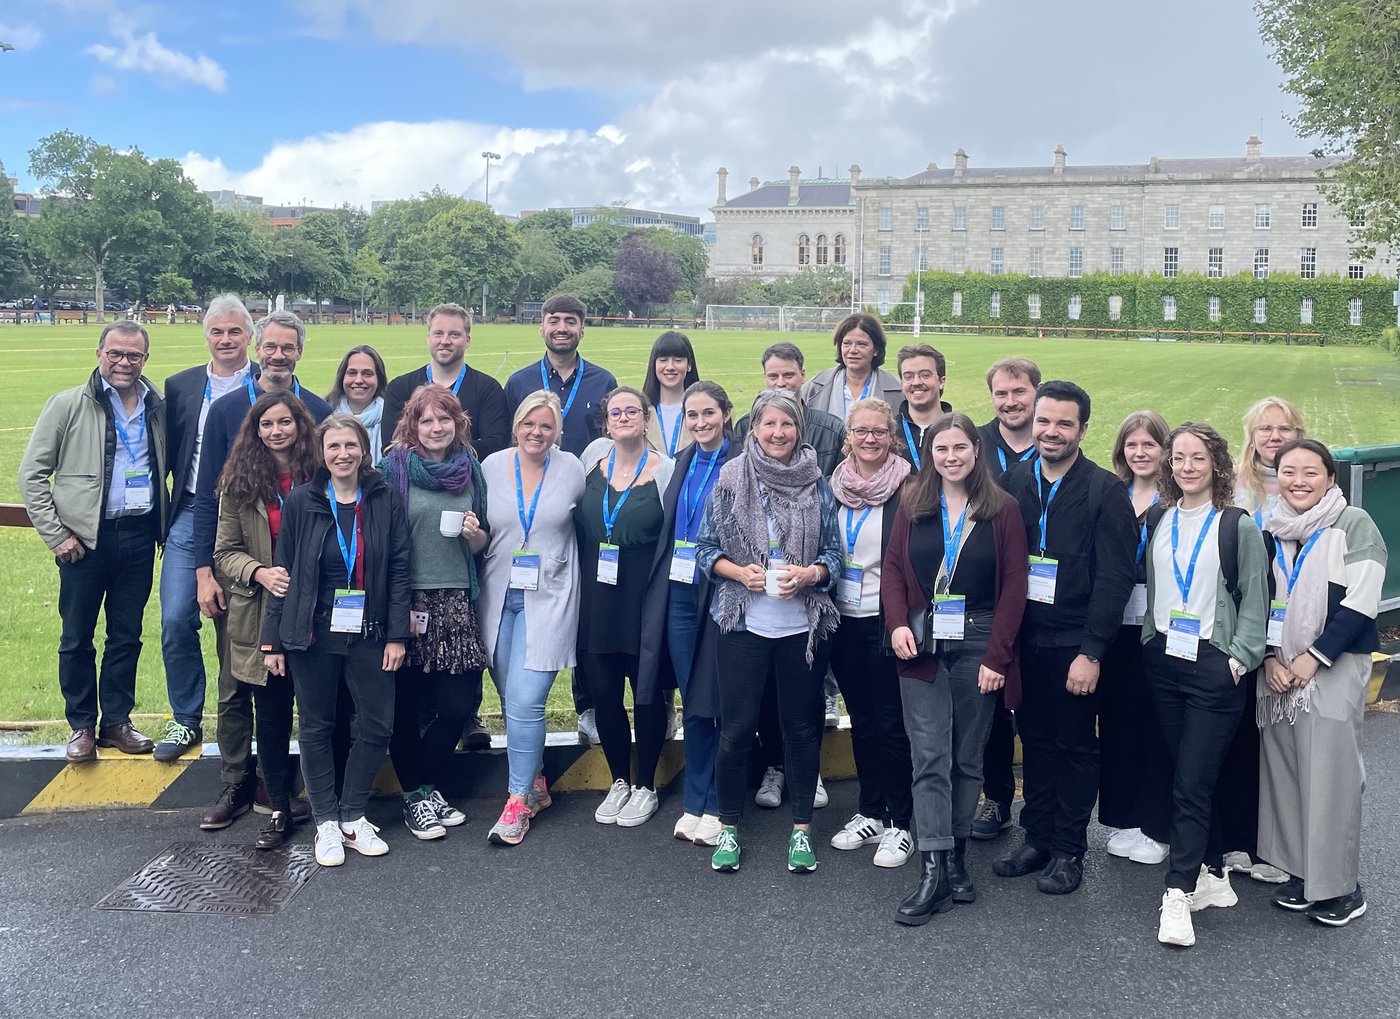 Members of the Sex Differences in Immunity research group stand outside a grassy area and Trinity College in Dublin. They all look cheerful and wear a conference badge around their necks